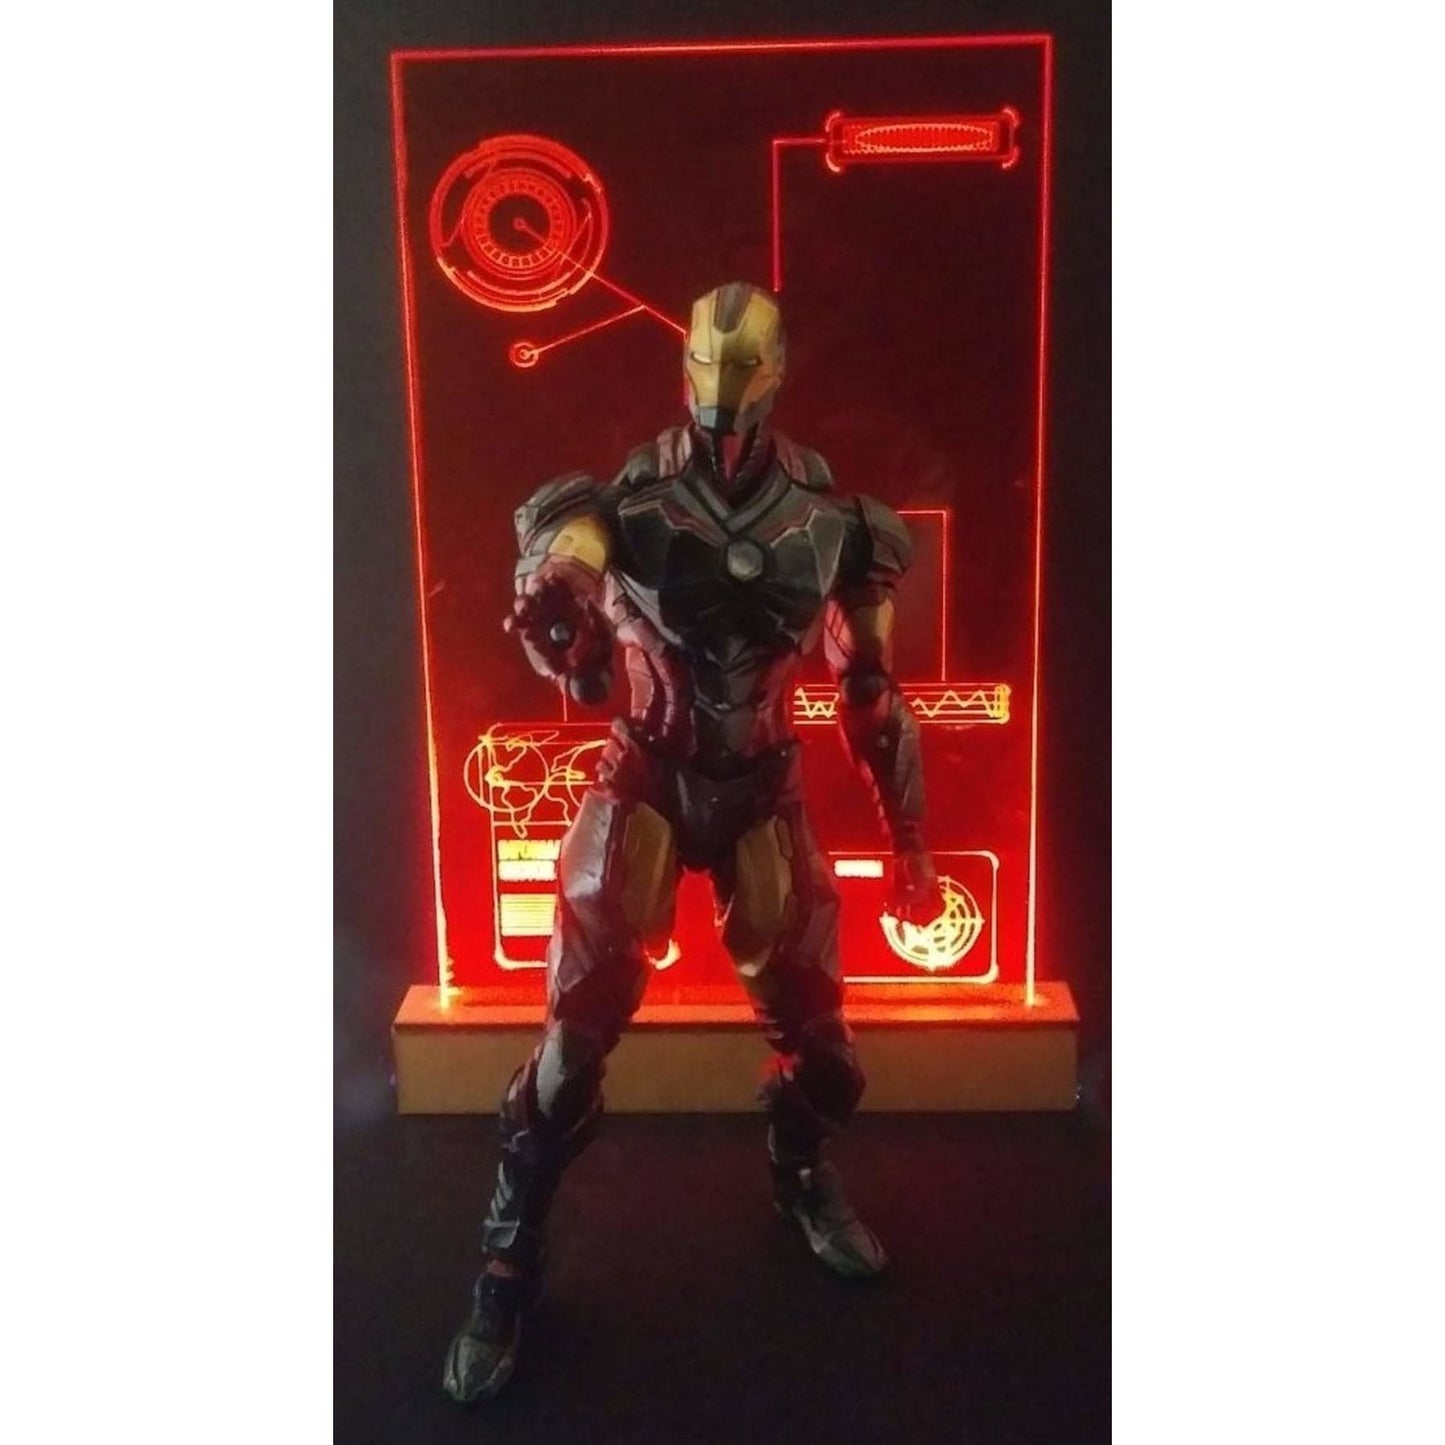 LED Diorama for Iron Man, Black Panther, Dr Strange and more, many sizes. Night Lamp